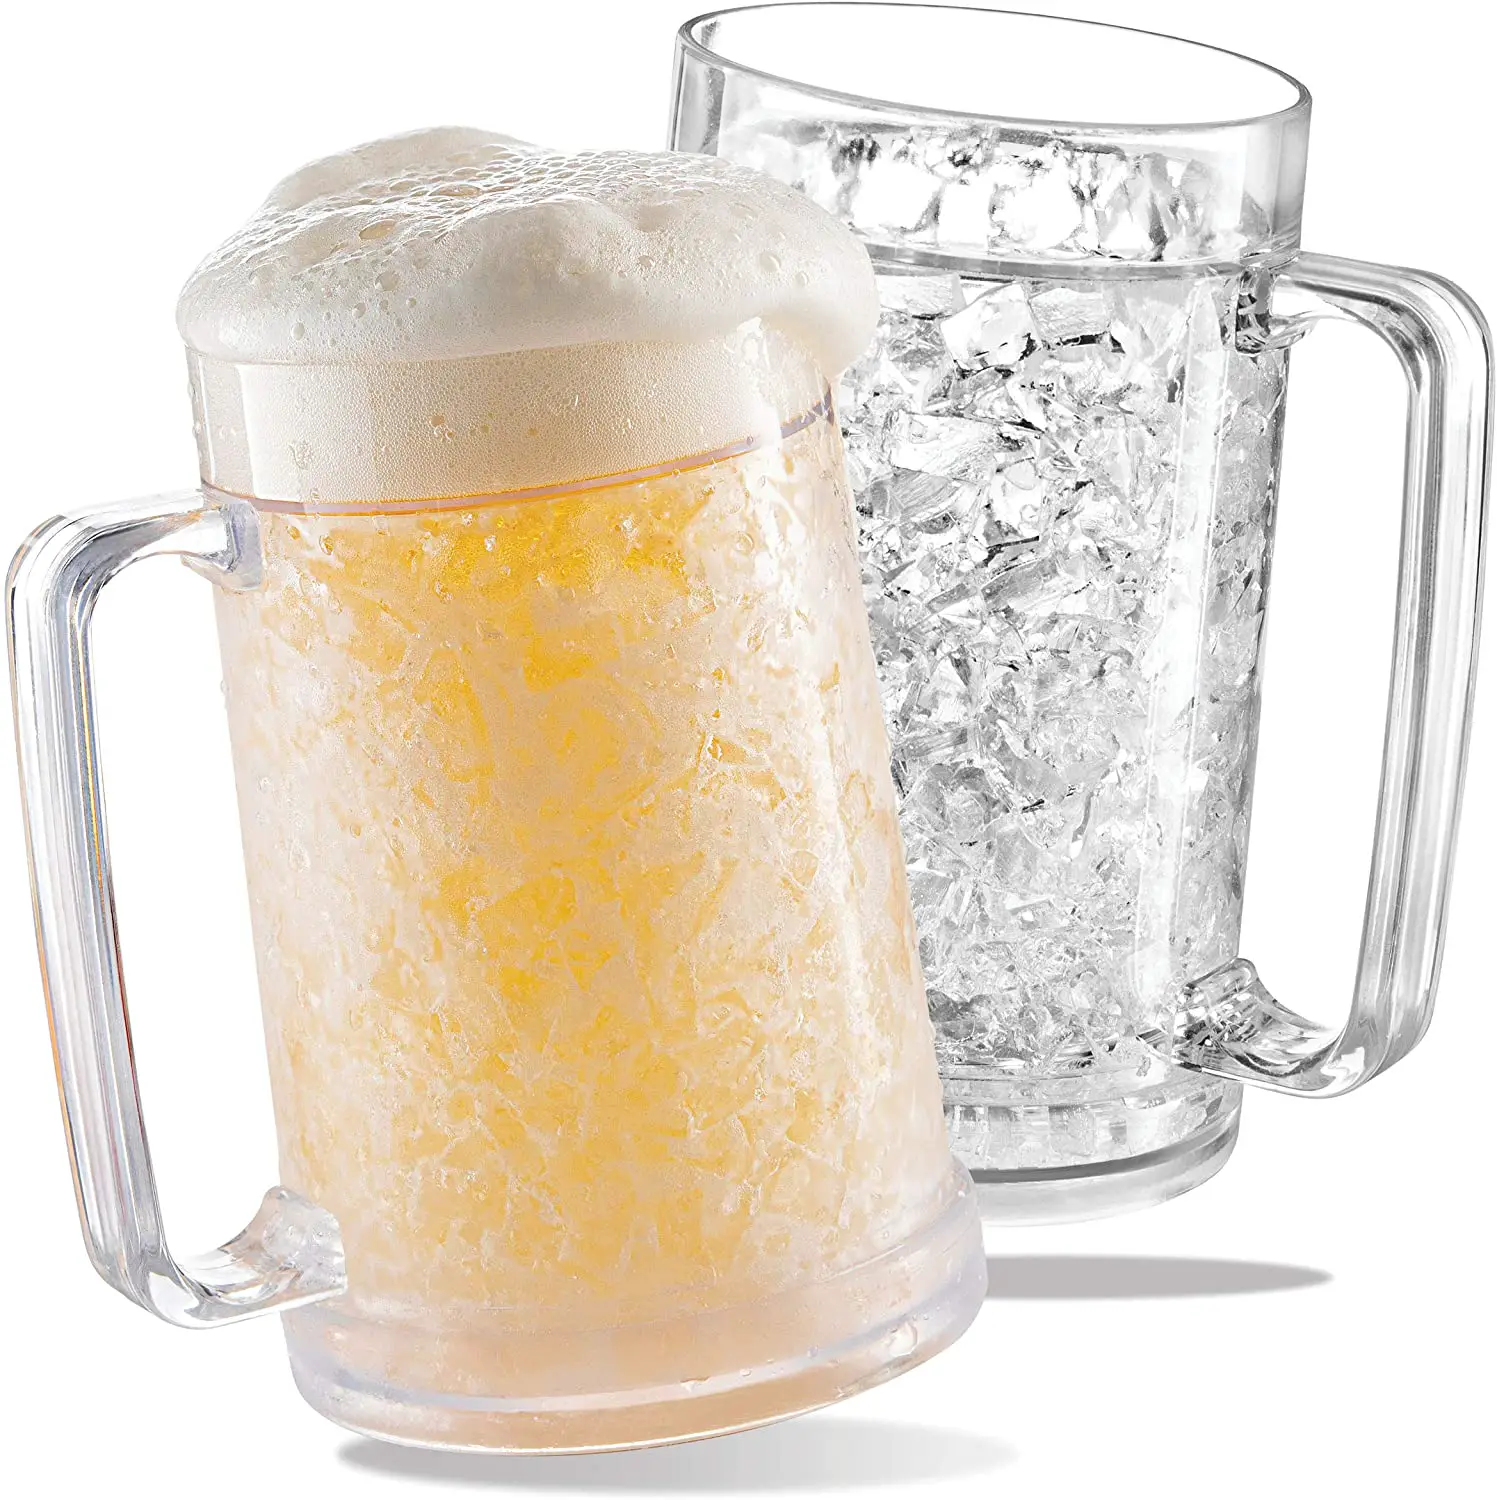 beer pint glass for valentine's day gift ideas for your man